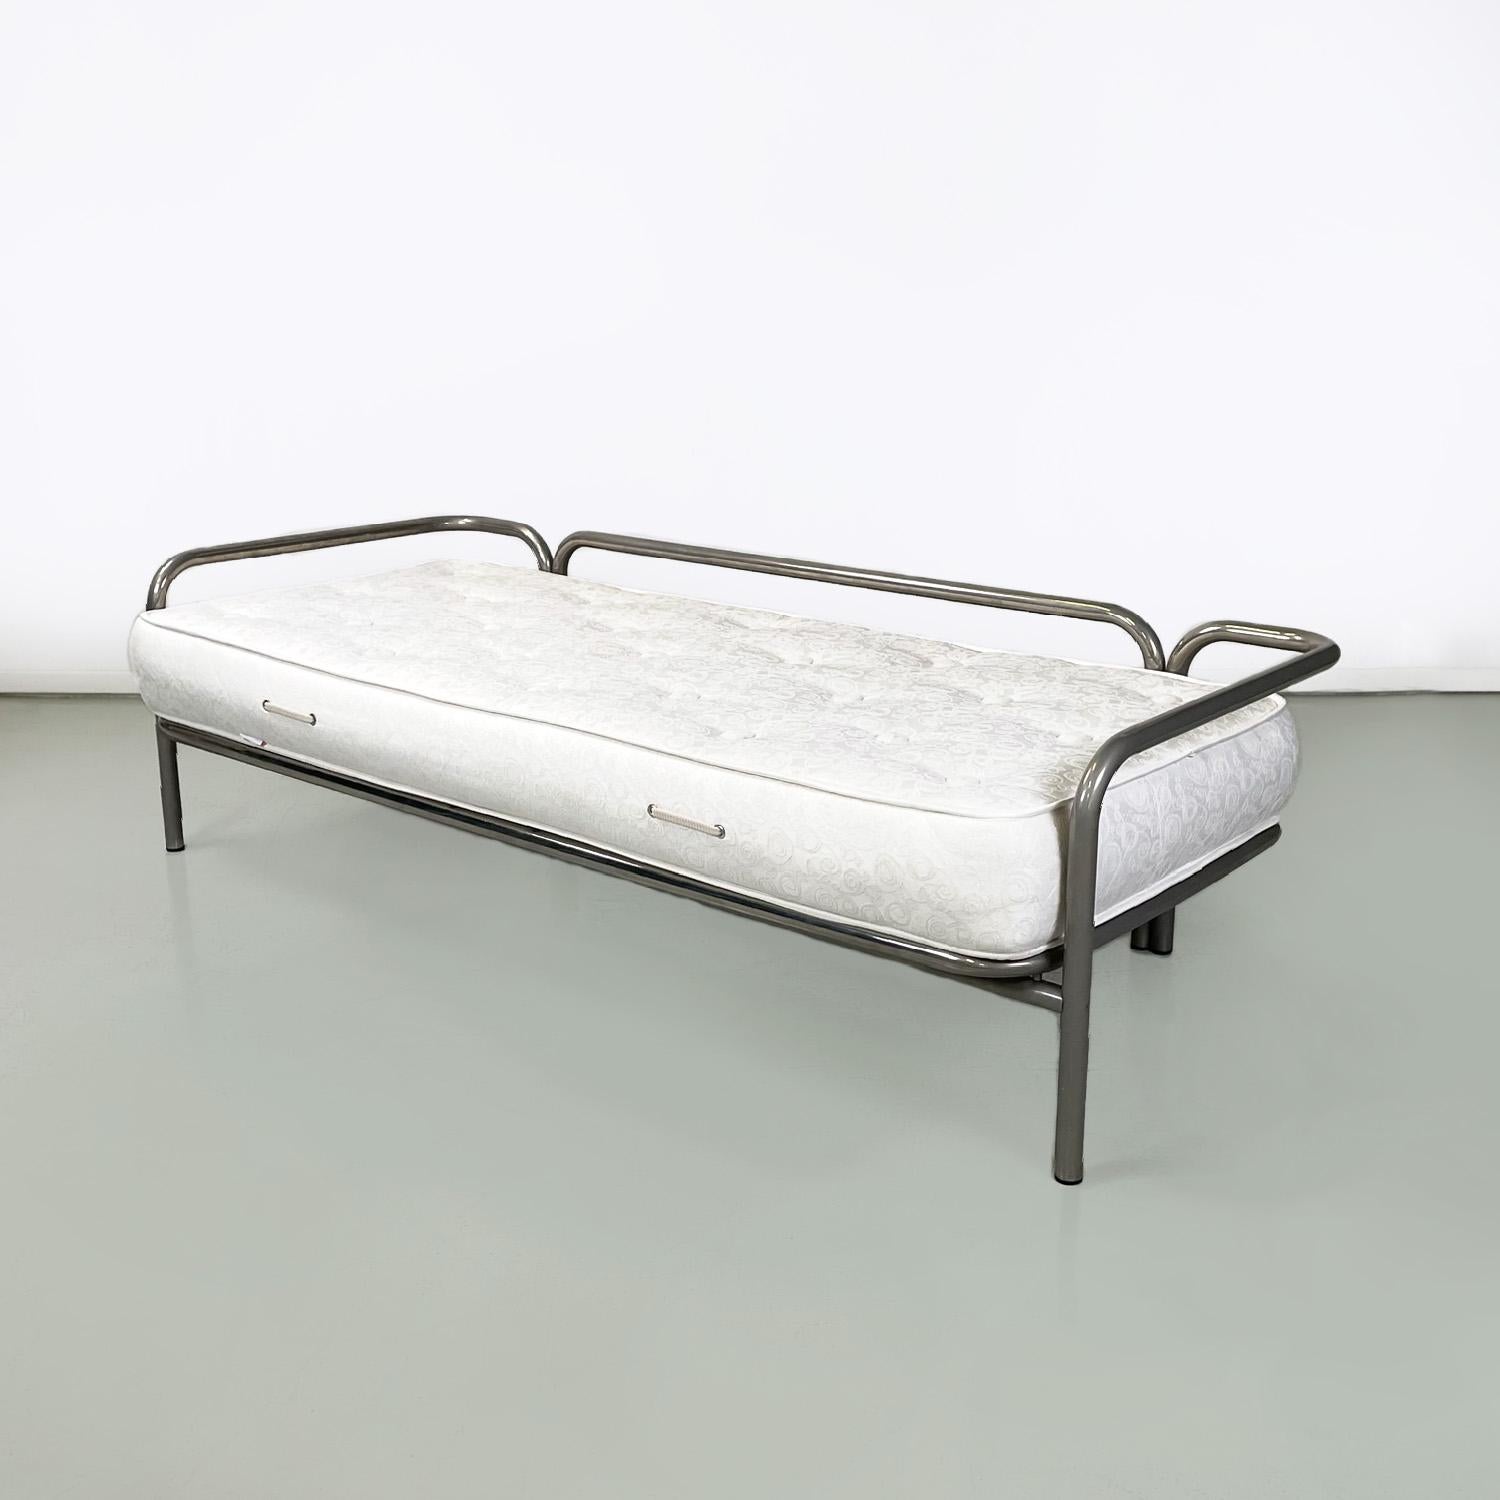 Late 20th Century Italian modern daybed sofa Locus Solus by Gae Aulenti for Poltronova, 1970s